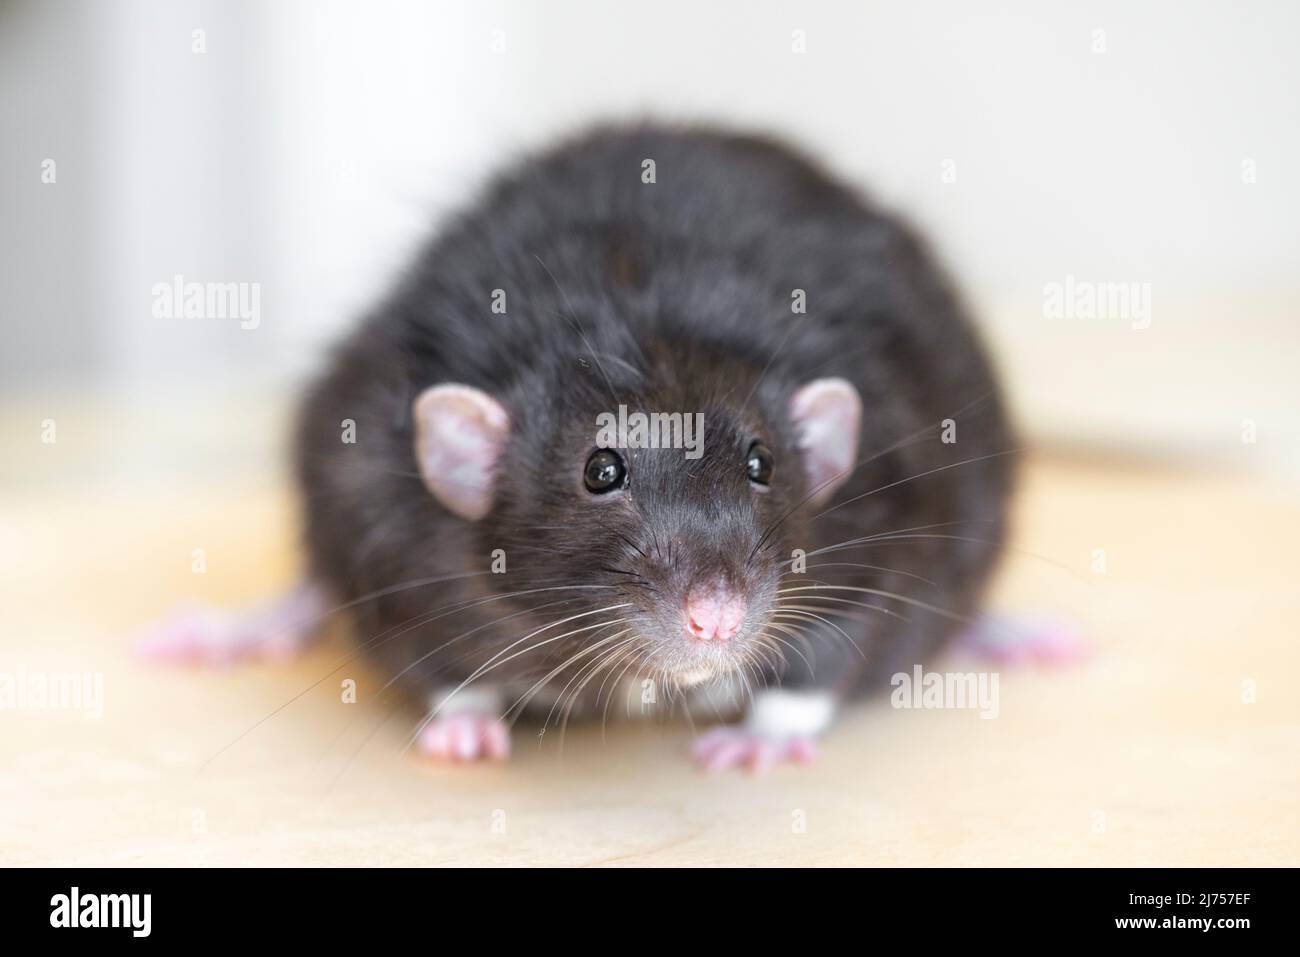 Cute black rat with pink paws, ears and nose, long whiskers. Close up portrait. Stock Photo